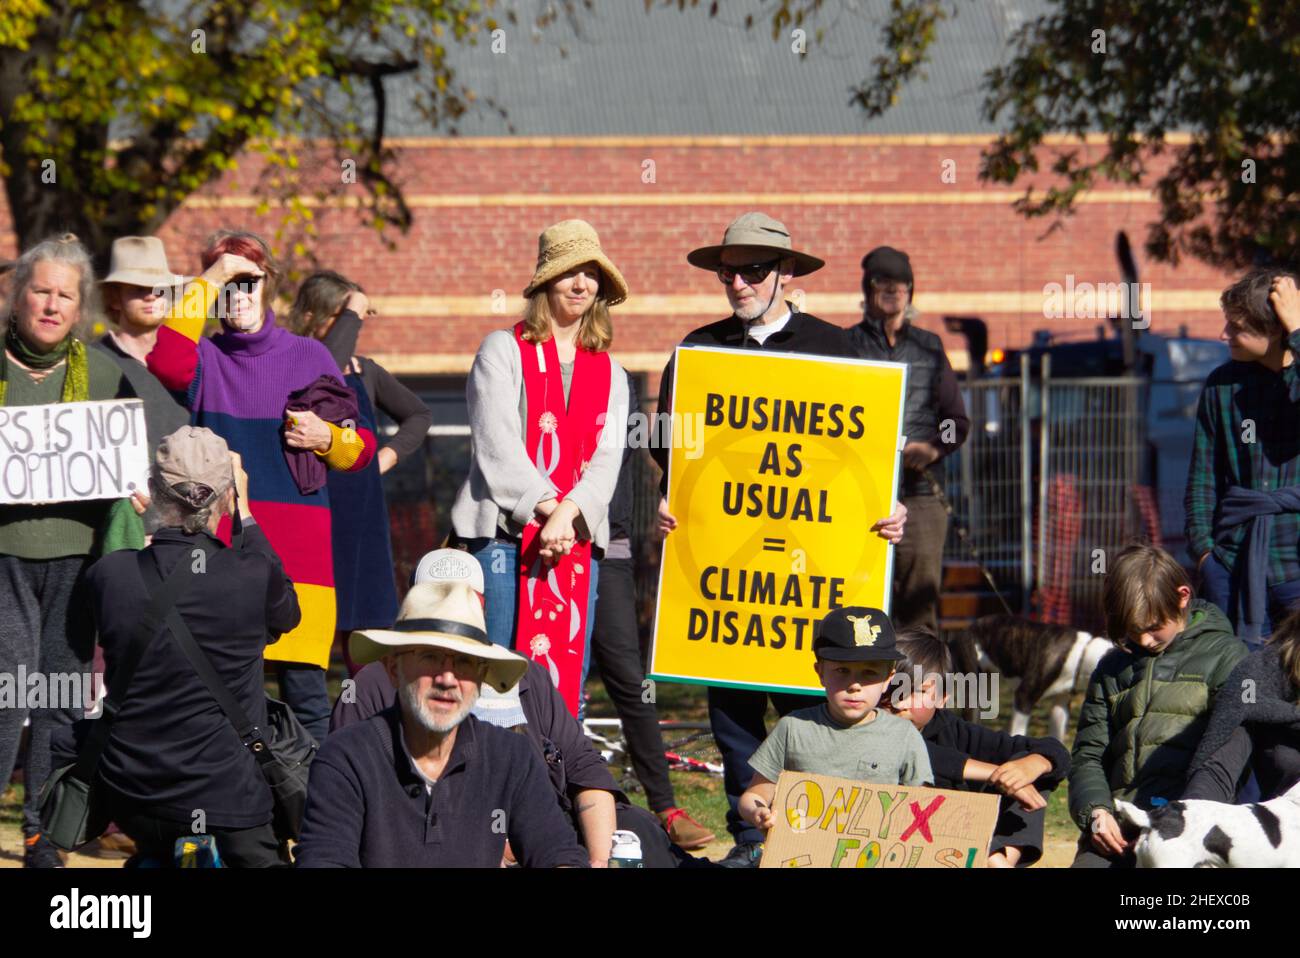 Climate change protest sign and people demonstration rally for saving the environment, Castlemaine, Victoria, Australia. Stock Photo